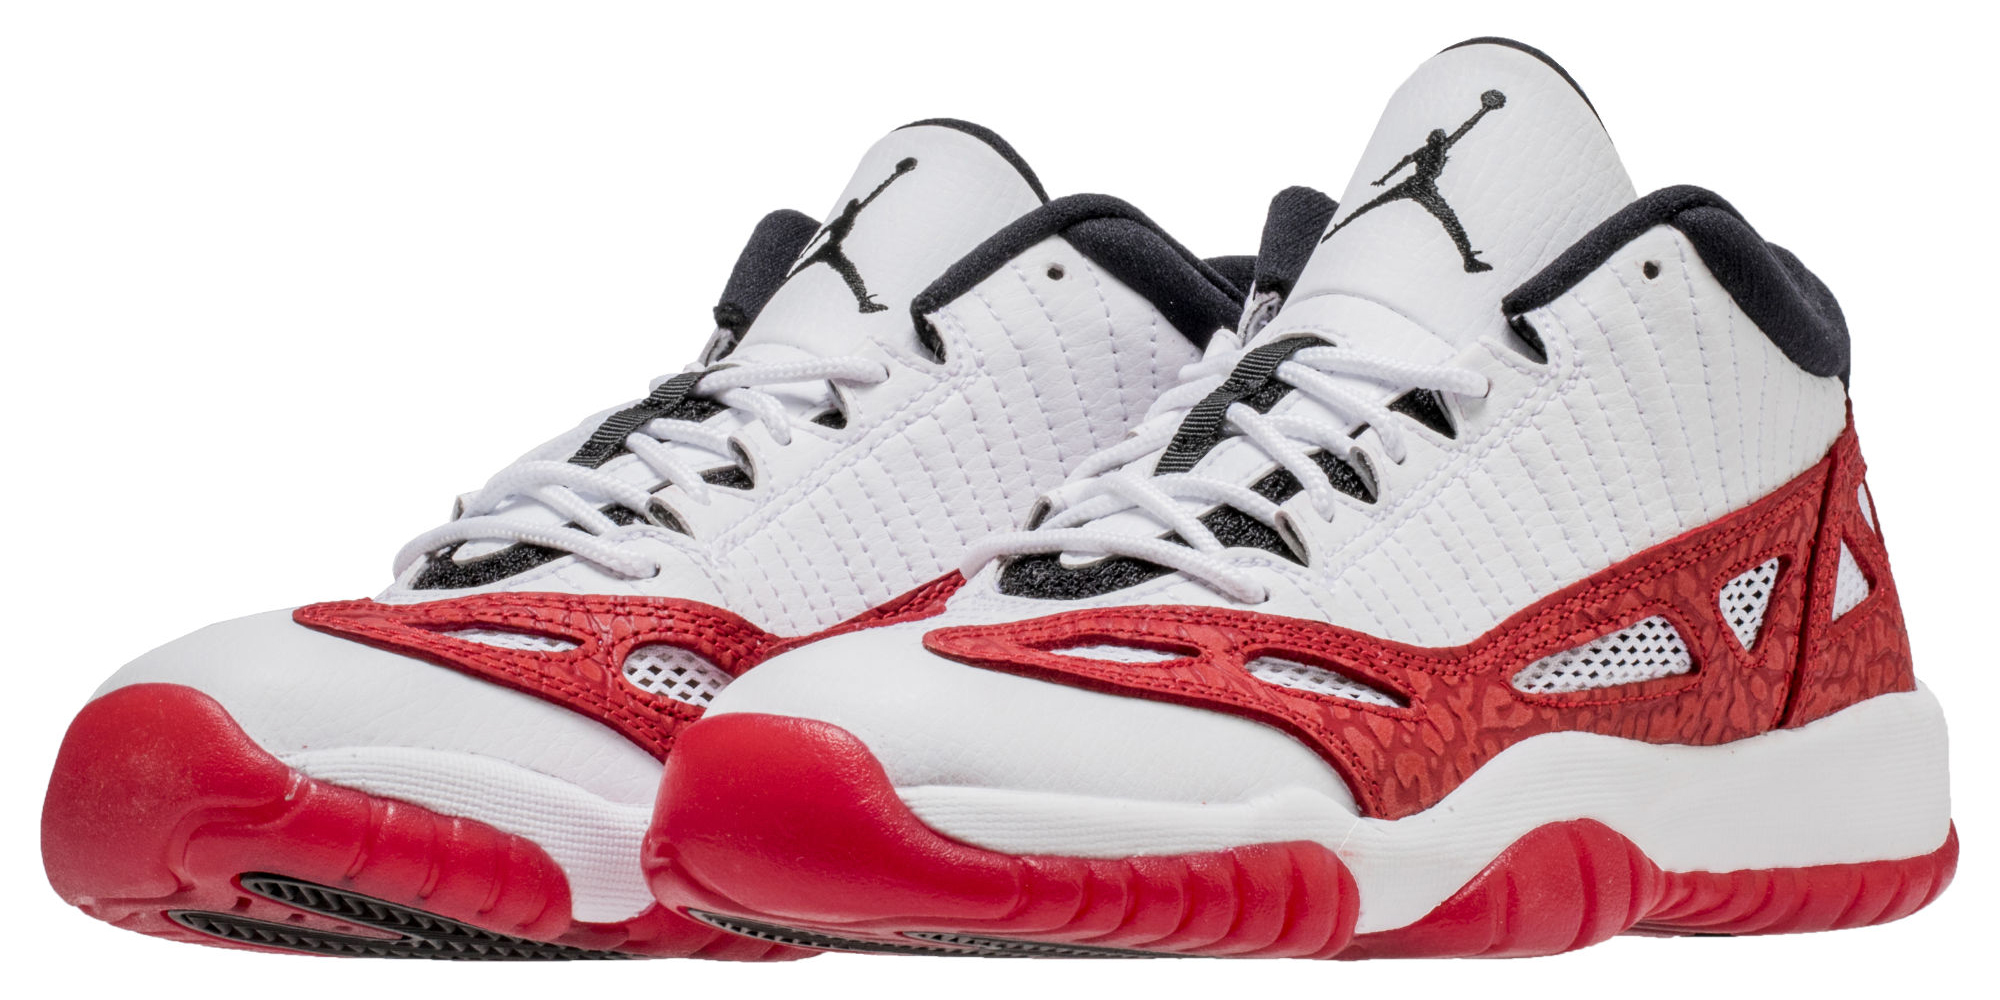 leder kristen at føre A New Colorway of the Air Jordan 11 Low IE Has Surfaced - WearTesters